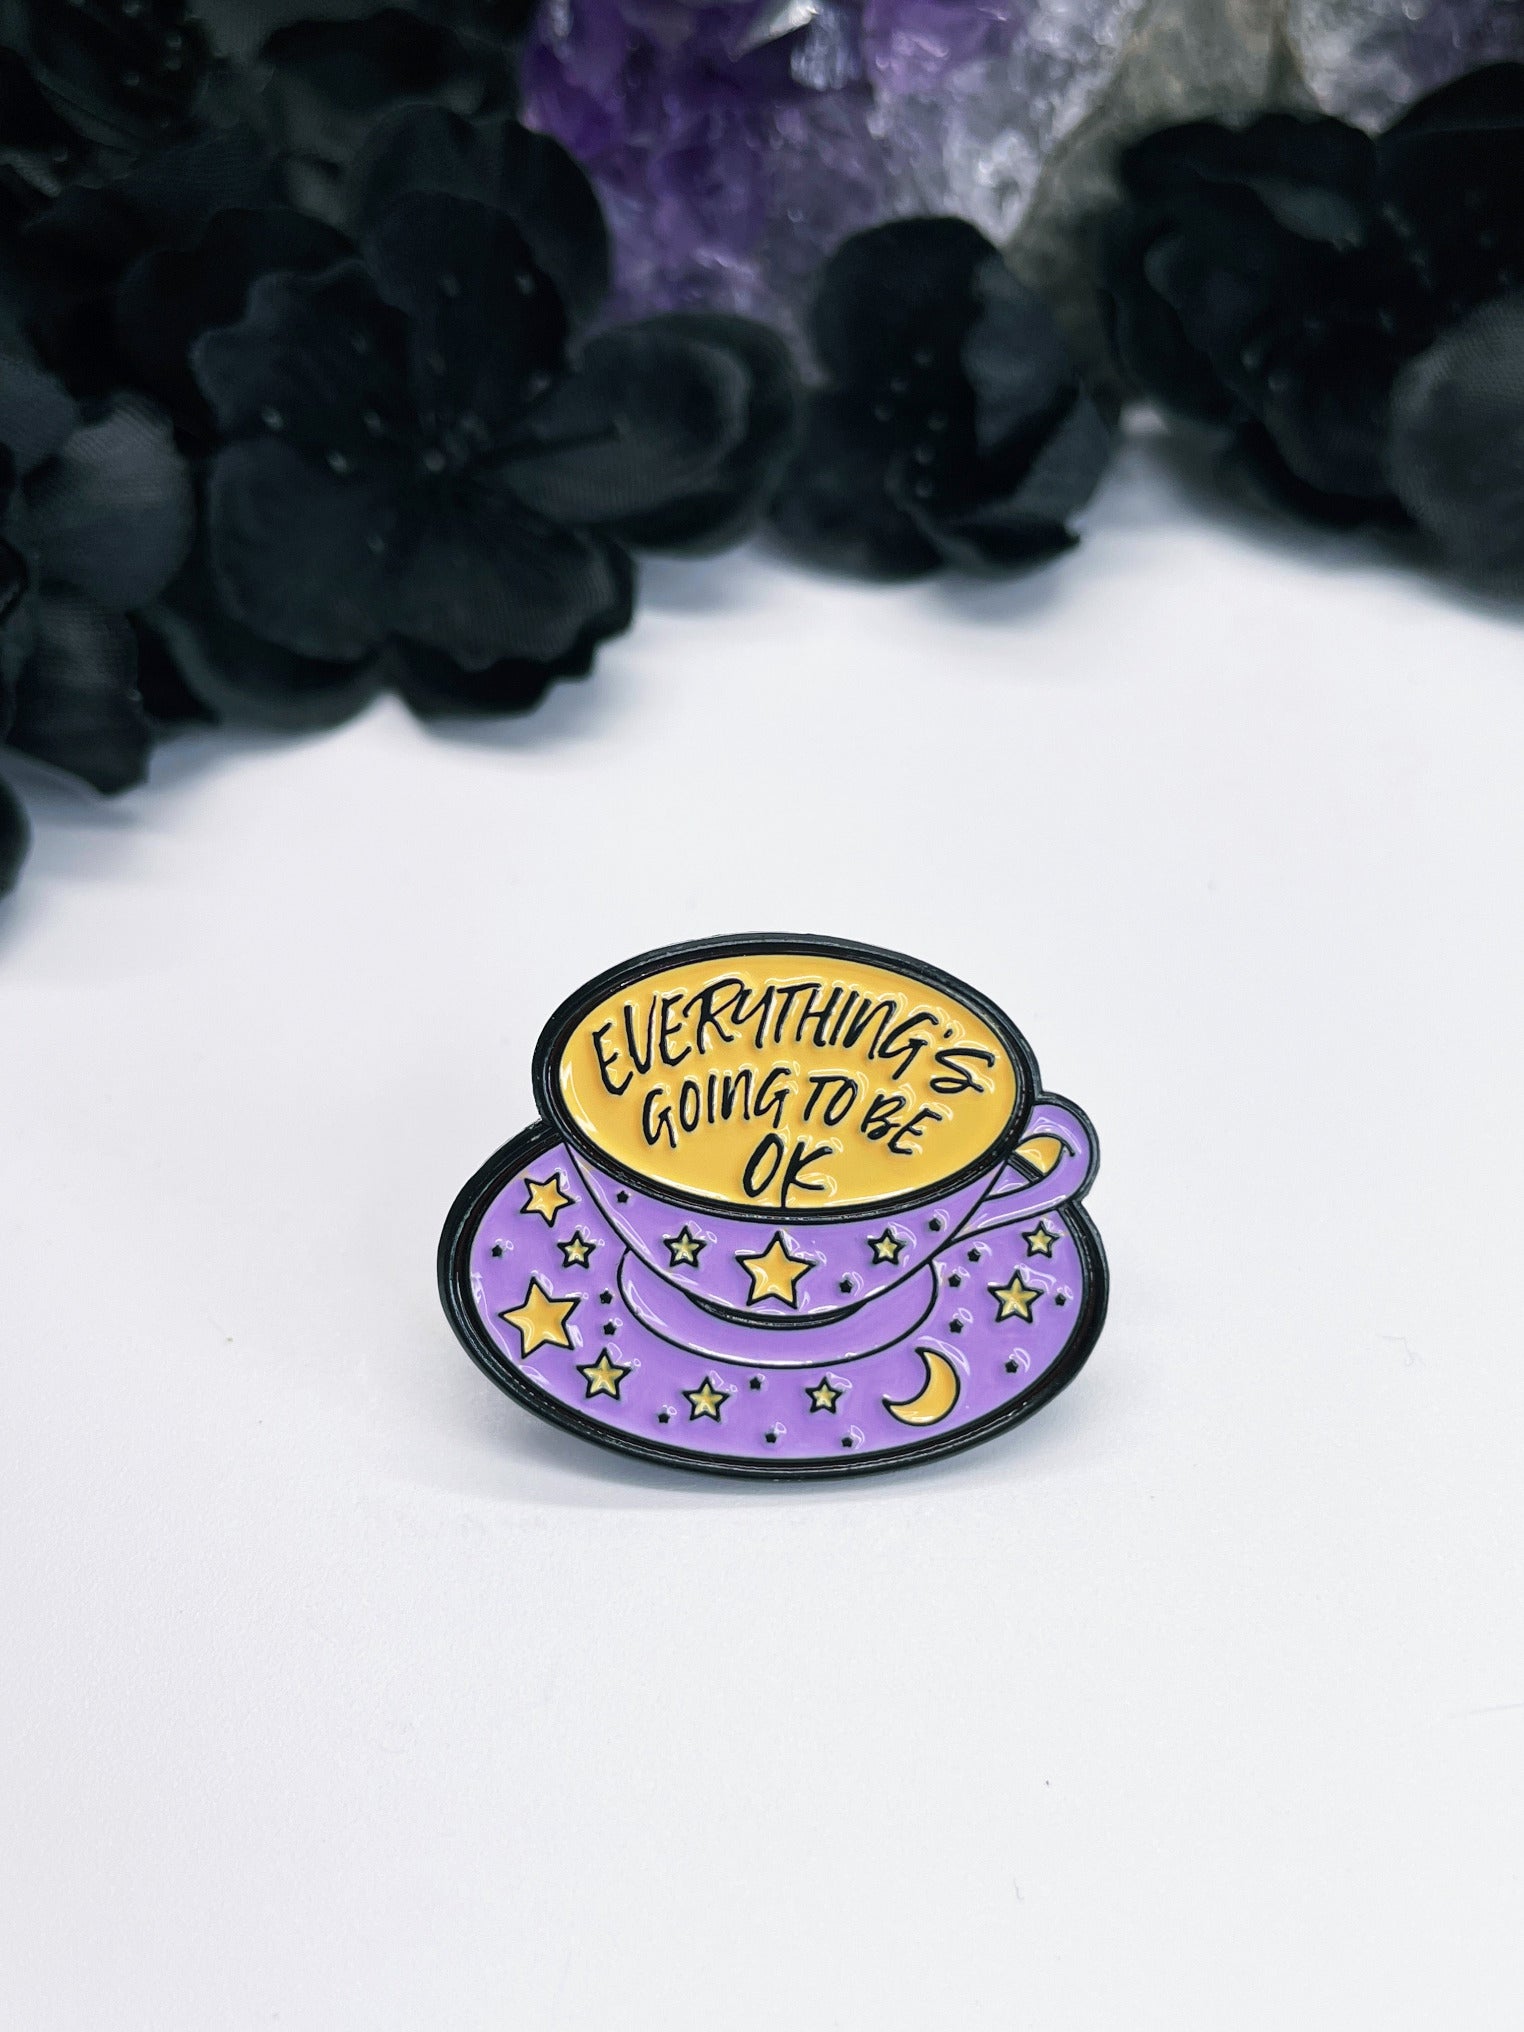 An image of an enamel pin featuring a teacup with the words "Everything's Going To Be Okay" written inside in black lettering. The pin has a black border and has metal fasteners on the back. 